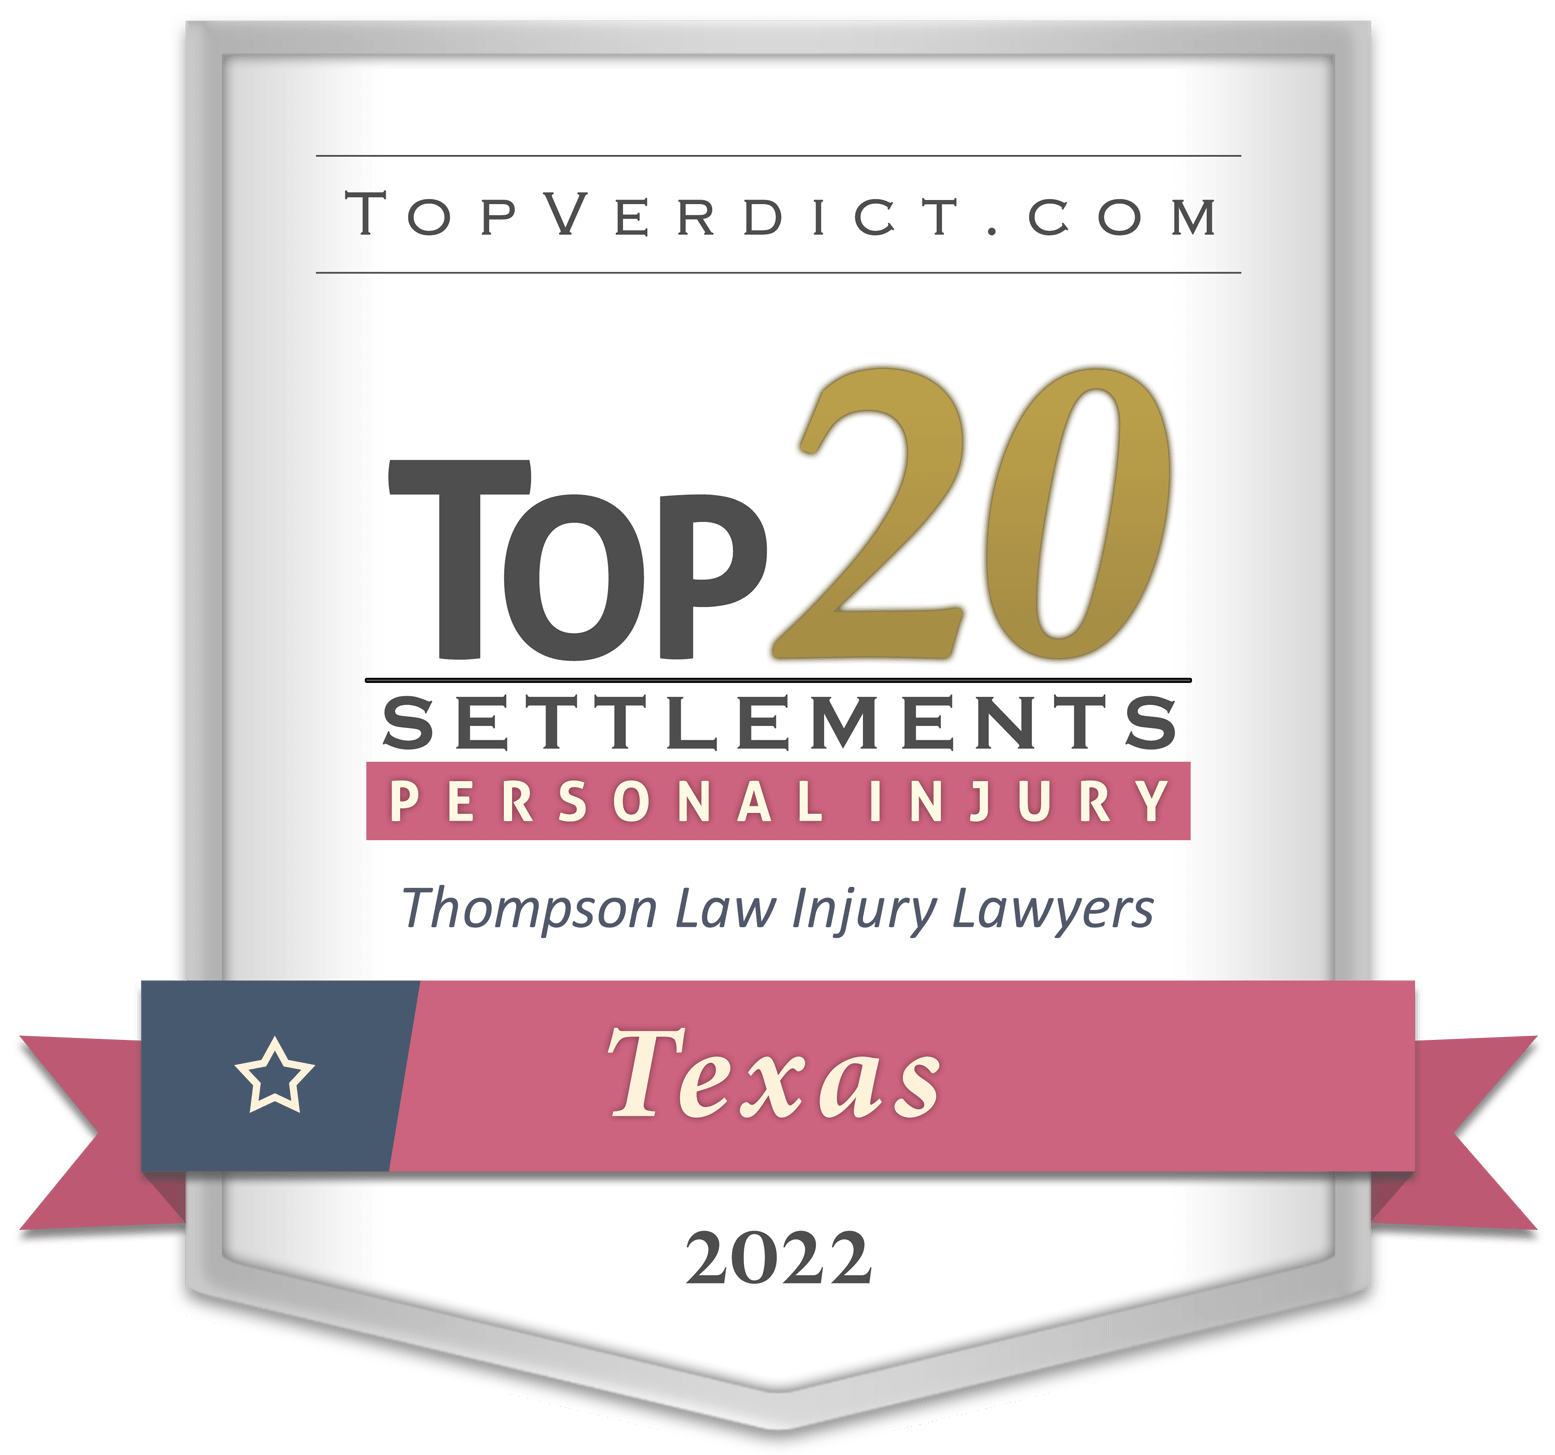 TopVerdict Top 20 personal injury settlements in Texas 2022 badge - Lubbock Personal Injury Law Firm